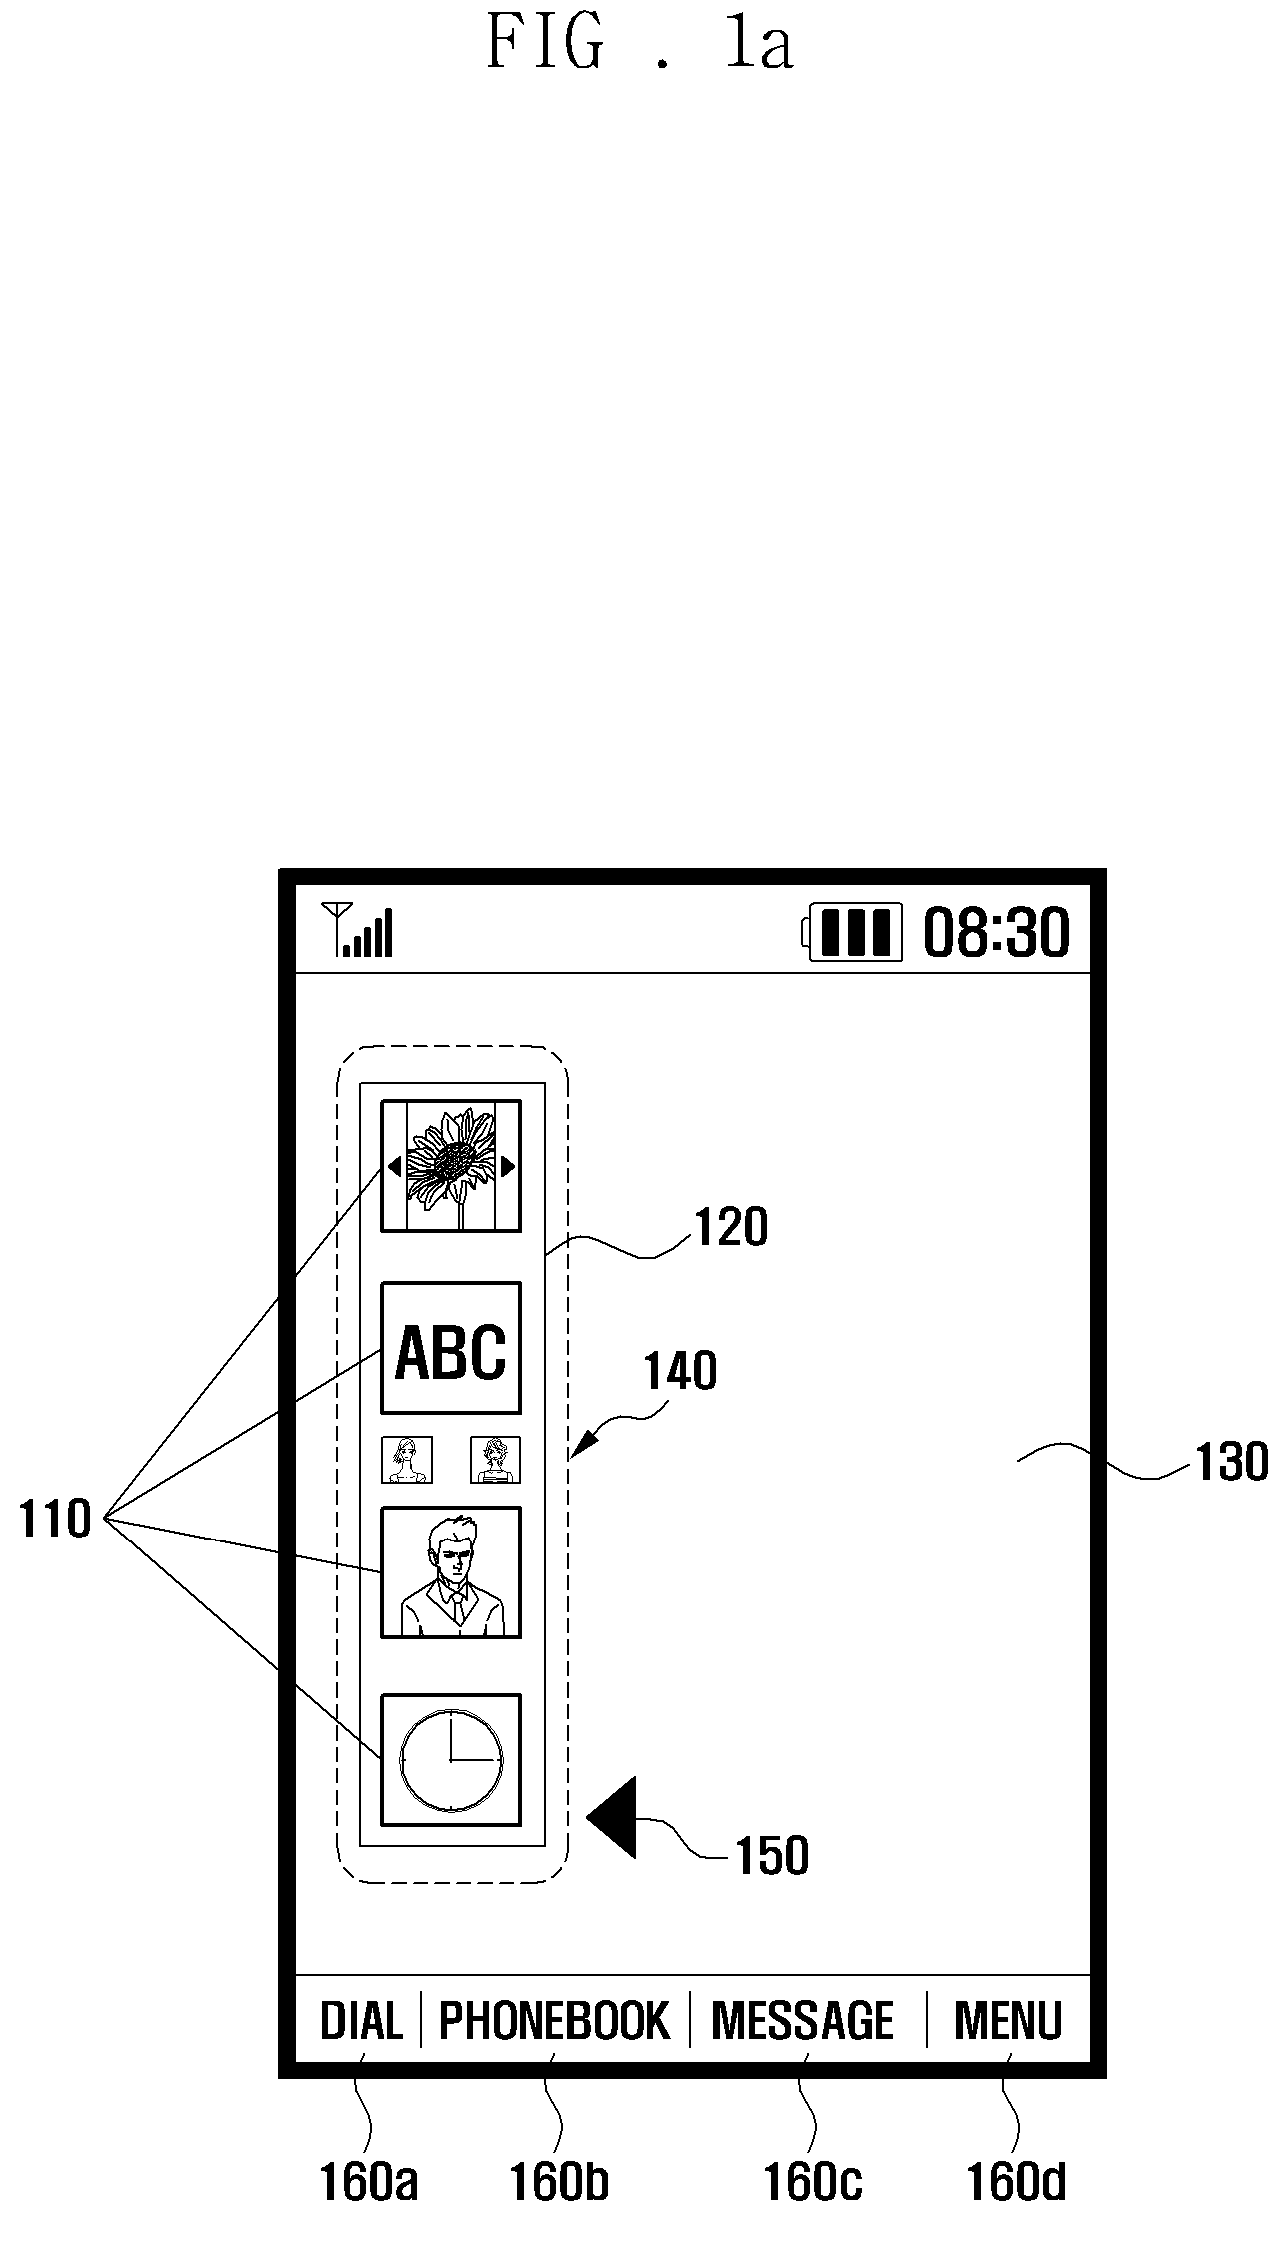 User interface method and apparatus for mobile terminal having touchscreen